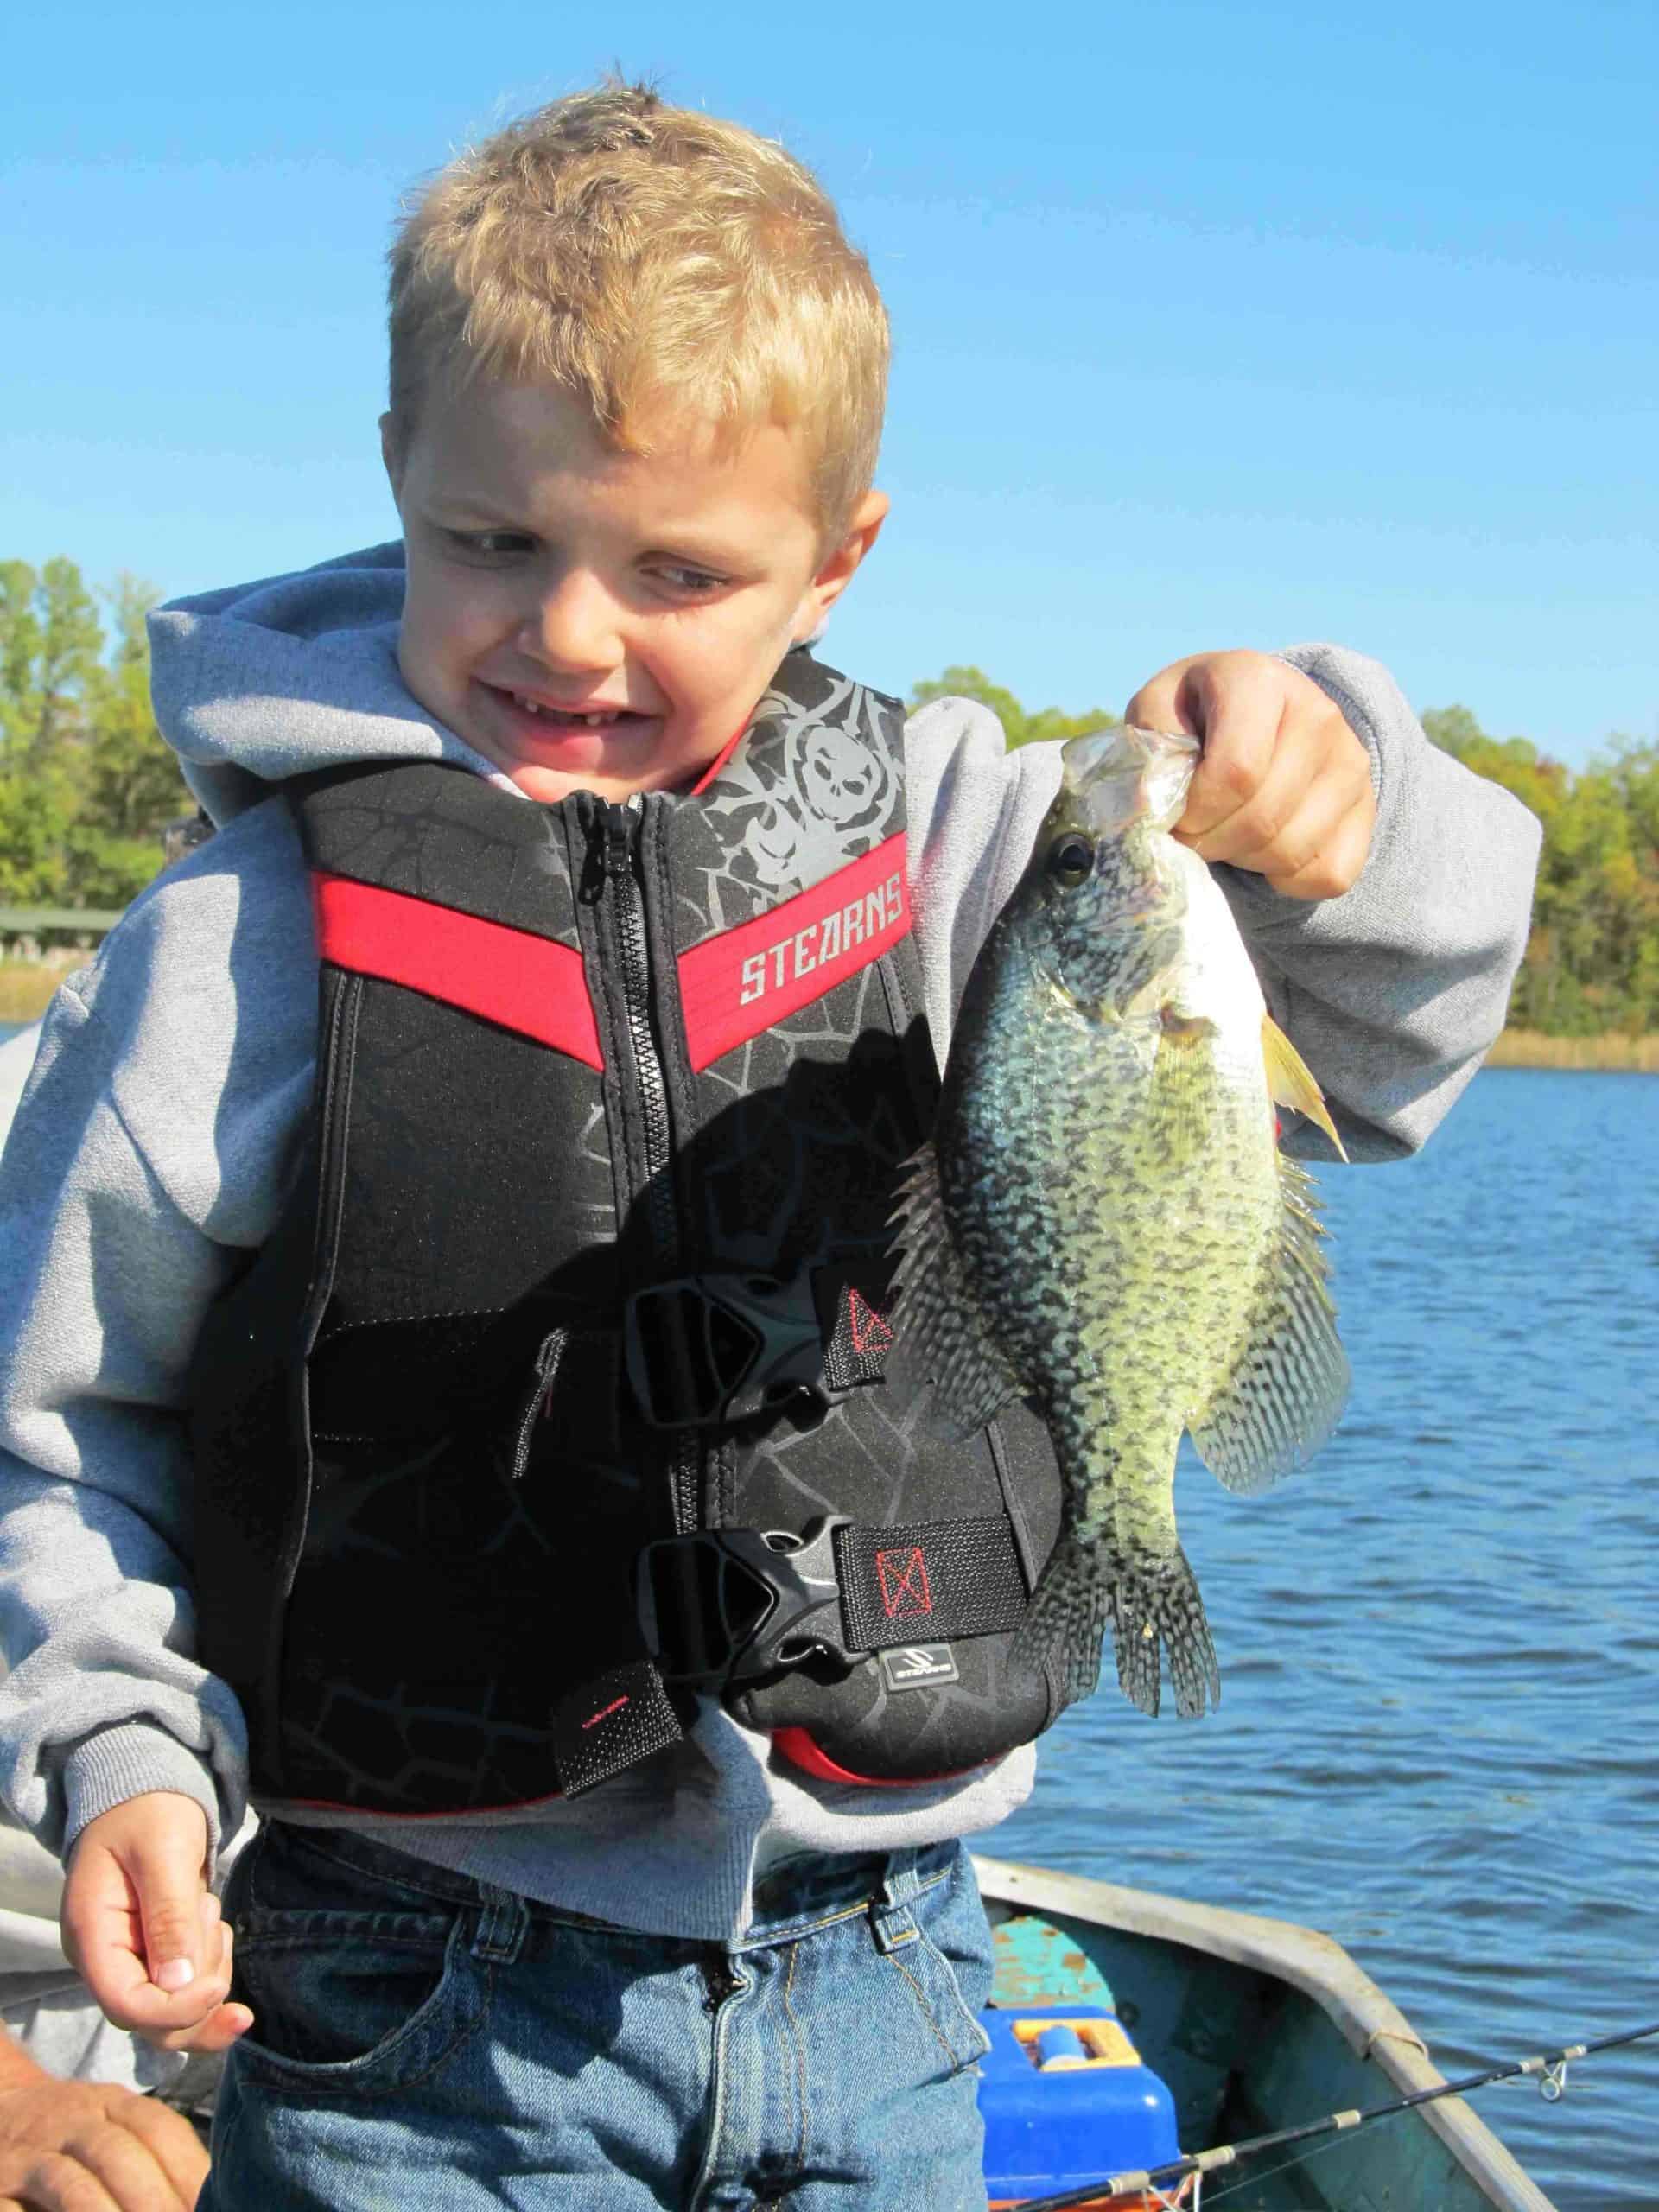 Crappie often suspend over deeper water outside of weedbeds in the fall. Small jigs on ultra-light tackle offer a great way to catch them.